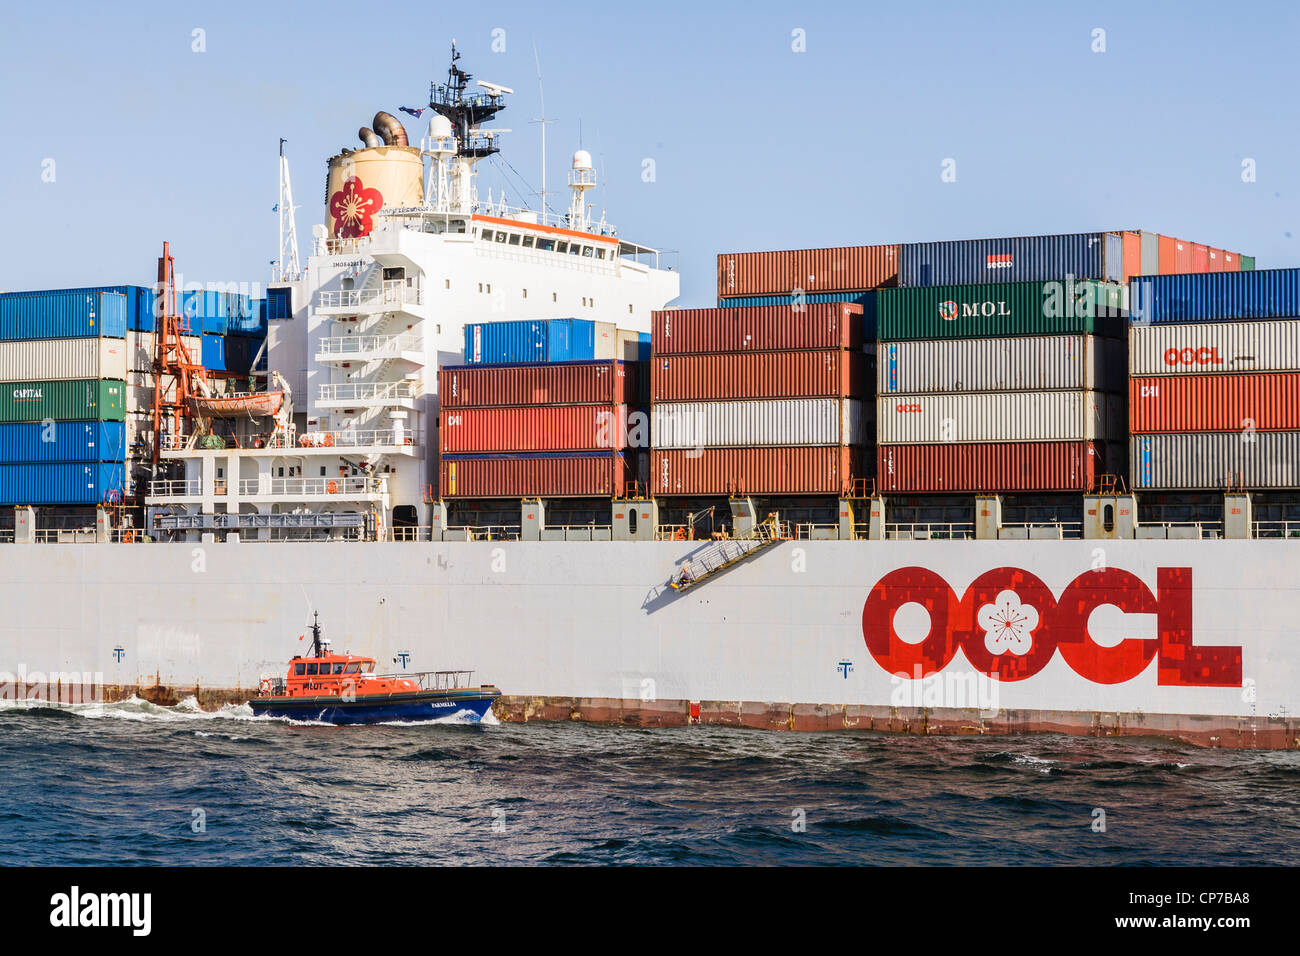 OOCL container ship 'Friendship' leaving Fremantle Port, Western Australia, assisted by pilot boat 'Parmelia'. Stock Photo